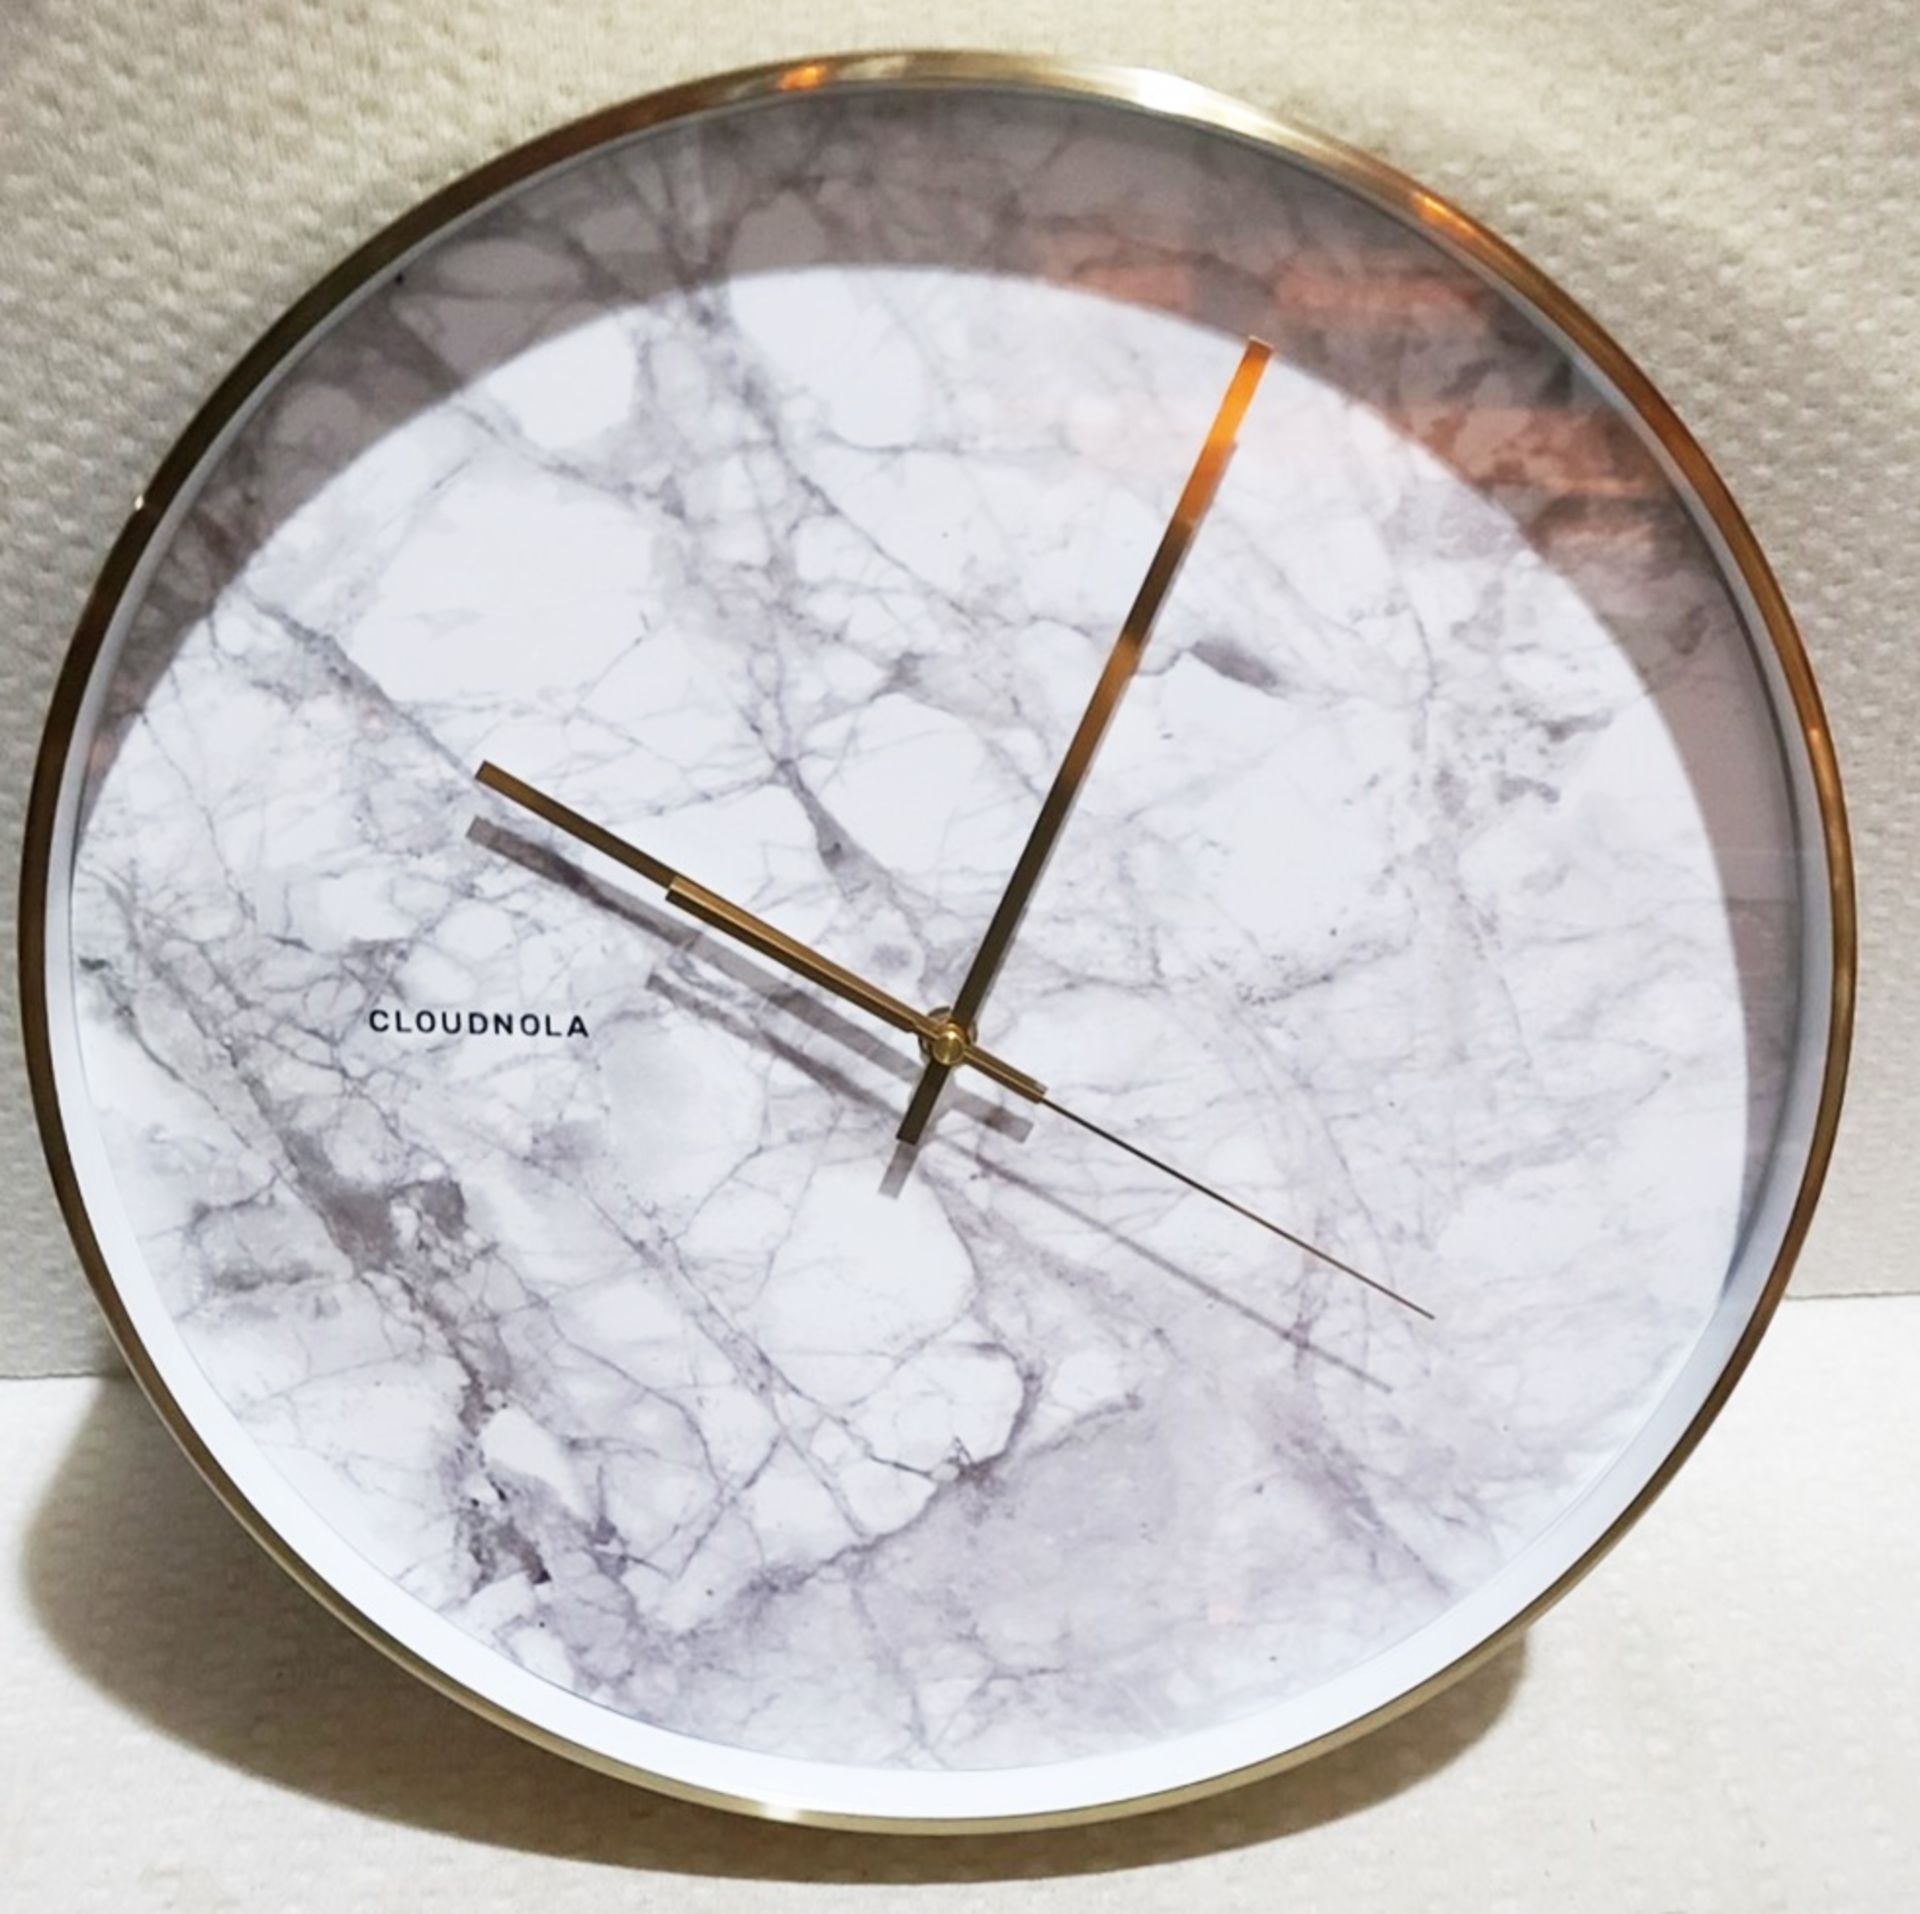 1 x CLOUDNOLA Designer Structure Marble Print Wall Clock With Polished Gold Trimmings 40cm - Boxed - Image 3 of 8